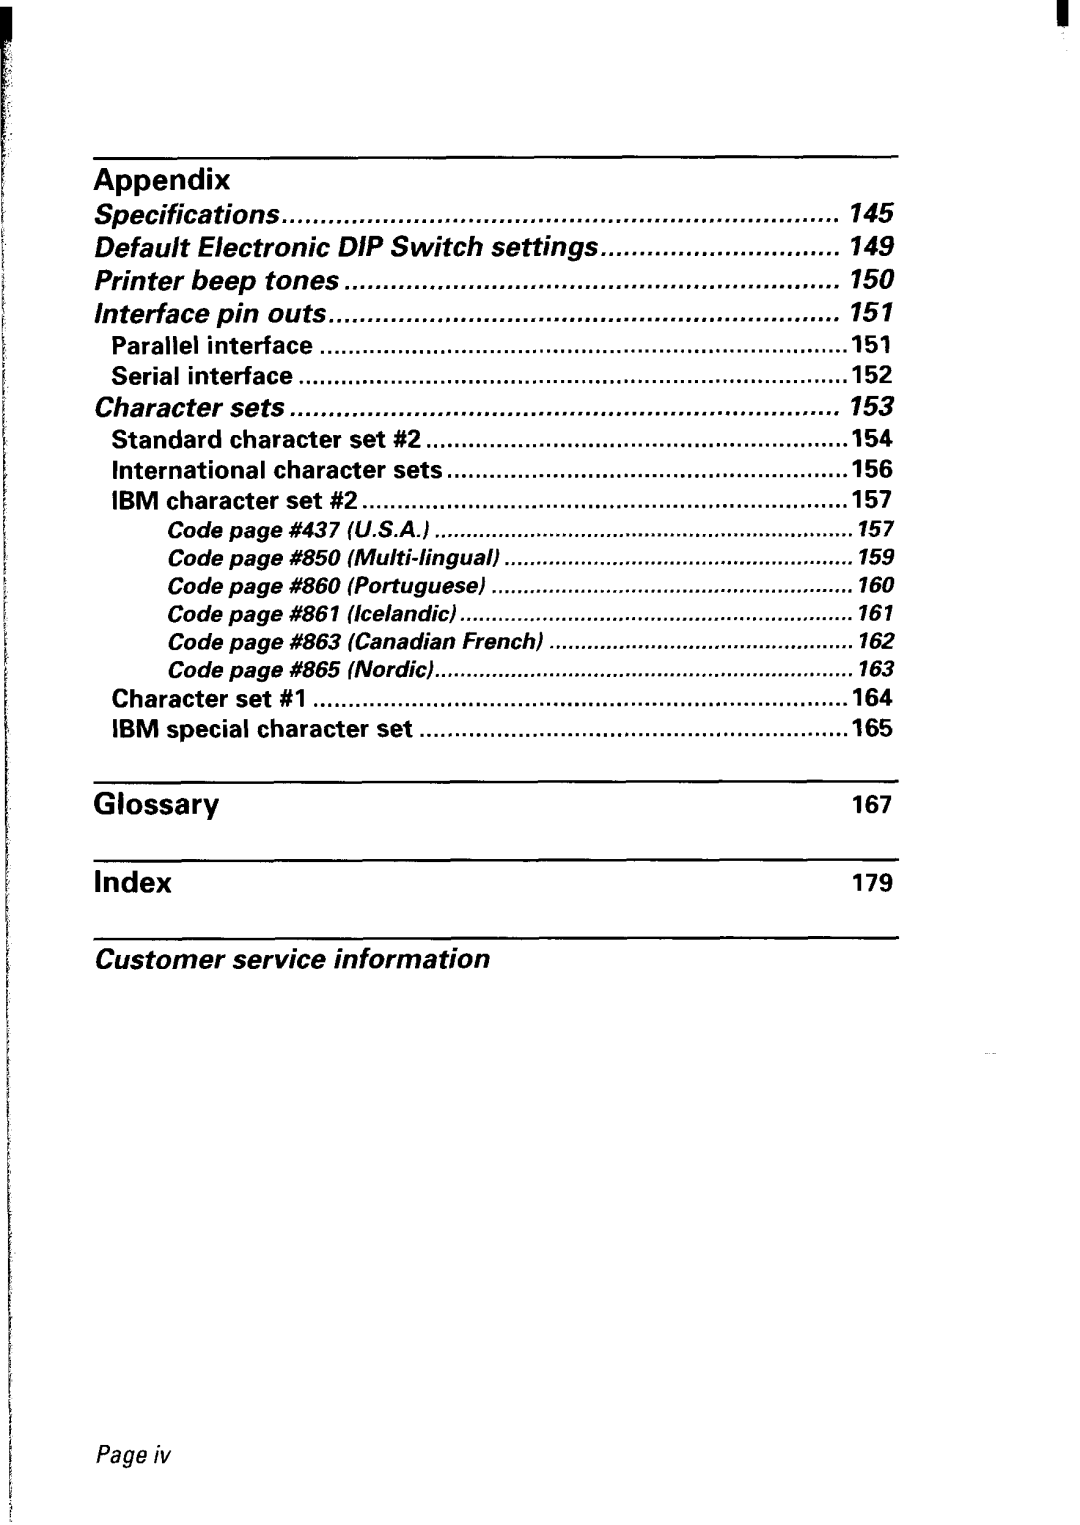 Star Micronics LC24-30 user manual Appendix, Glossary, Index 